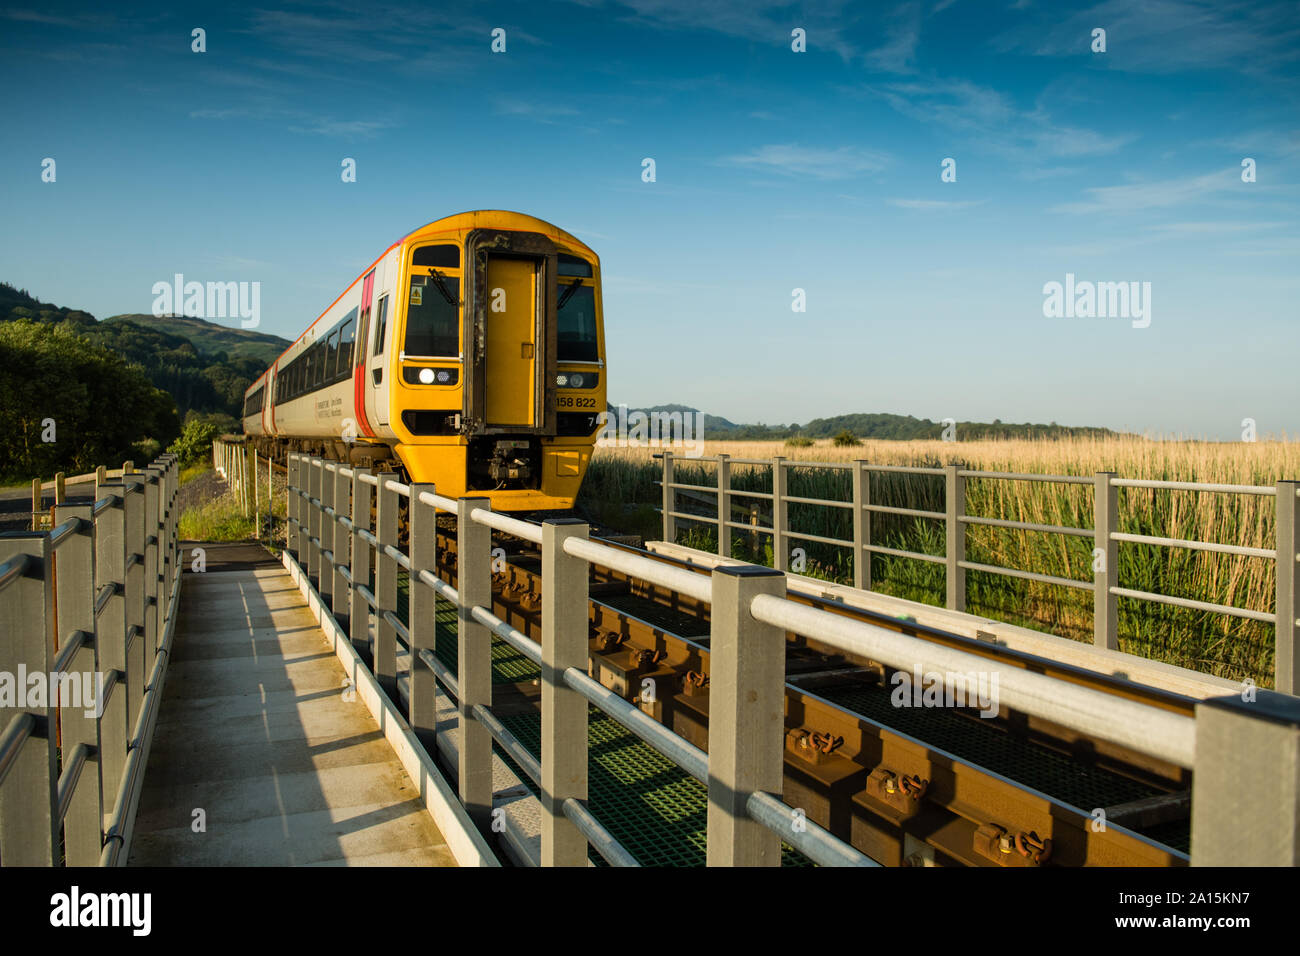 Public Transport in the UK: A Transport for Wales DMU [diesel multiple unit] local train approaching  Dyfi Junction station halt  on a sunny summer morning, Wales UK Stock Photo